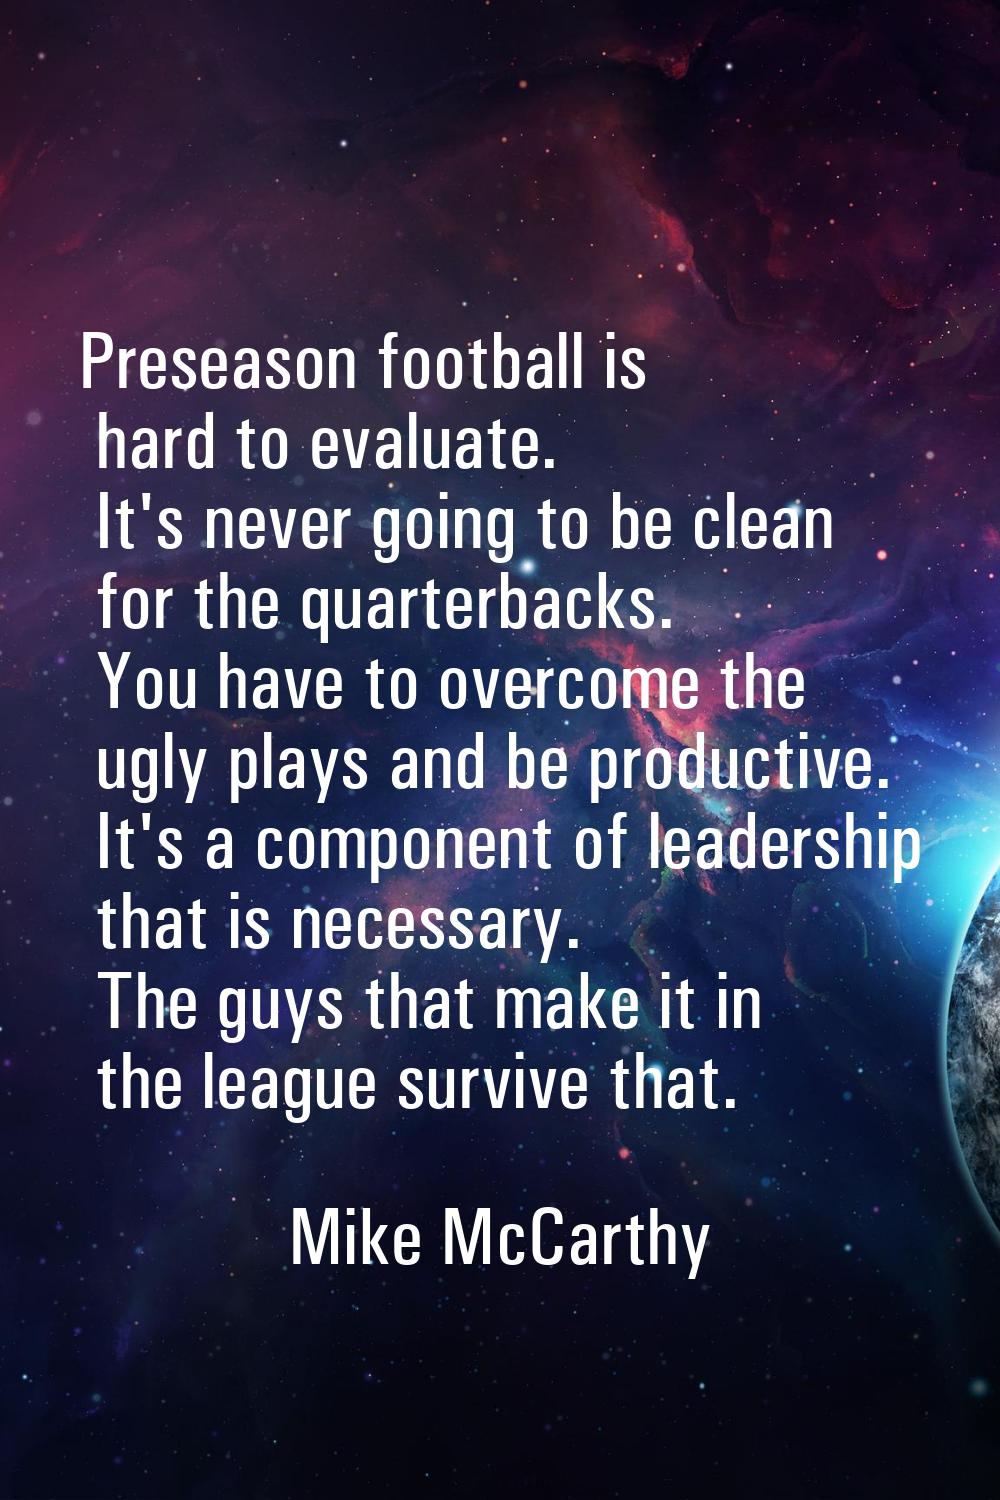 Preseason football is hard to evaluate. It's never going to be clean for the quarterbacks. You have